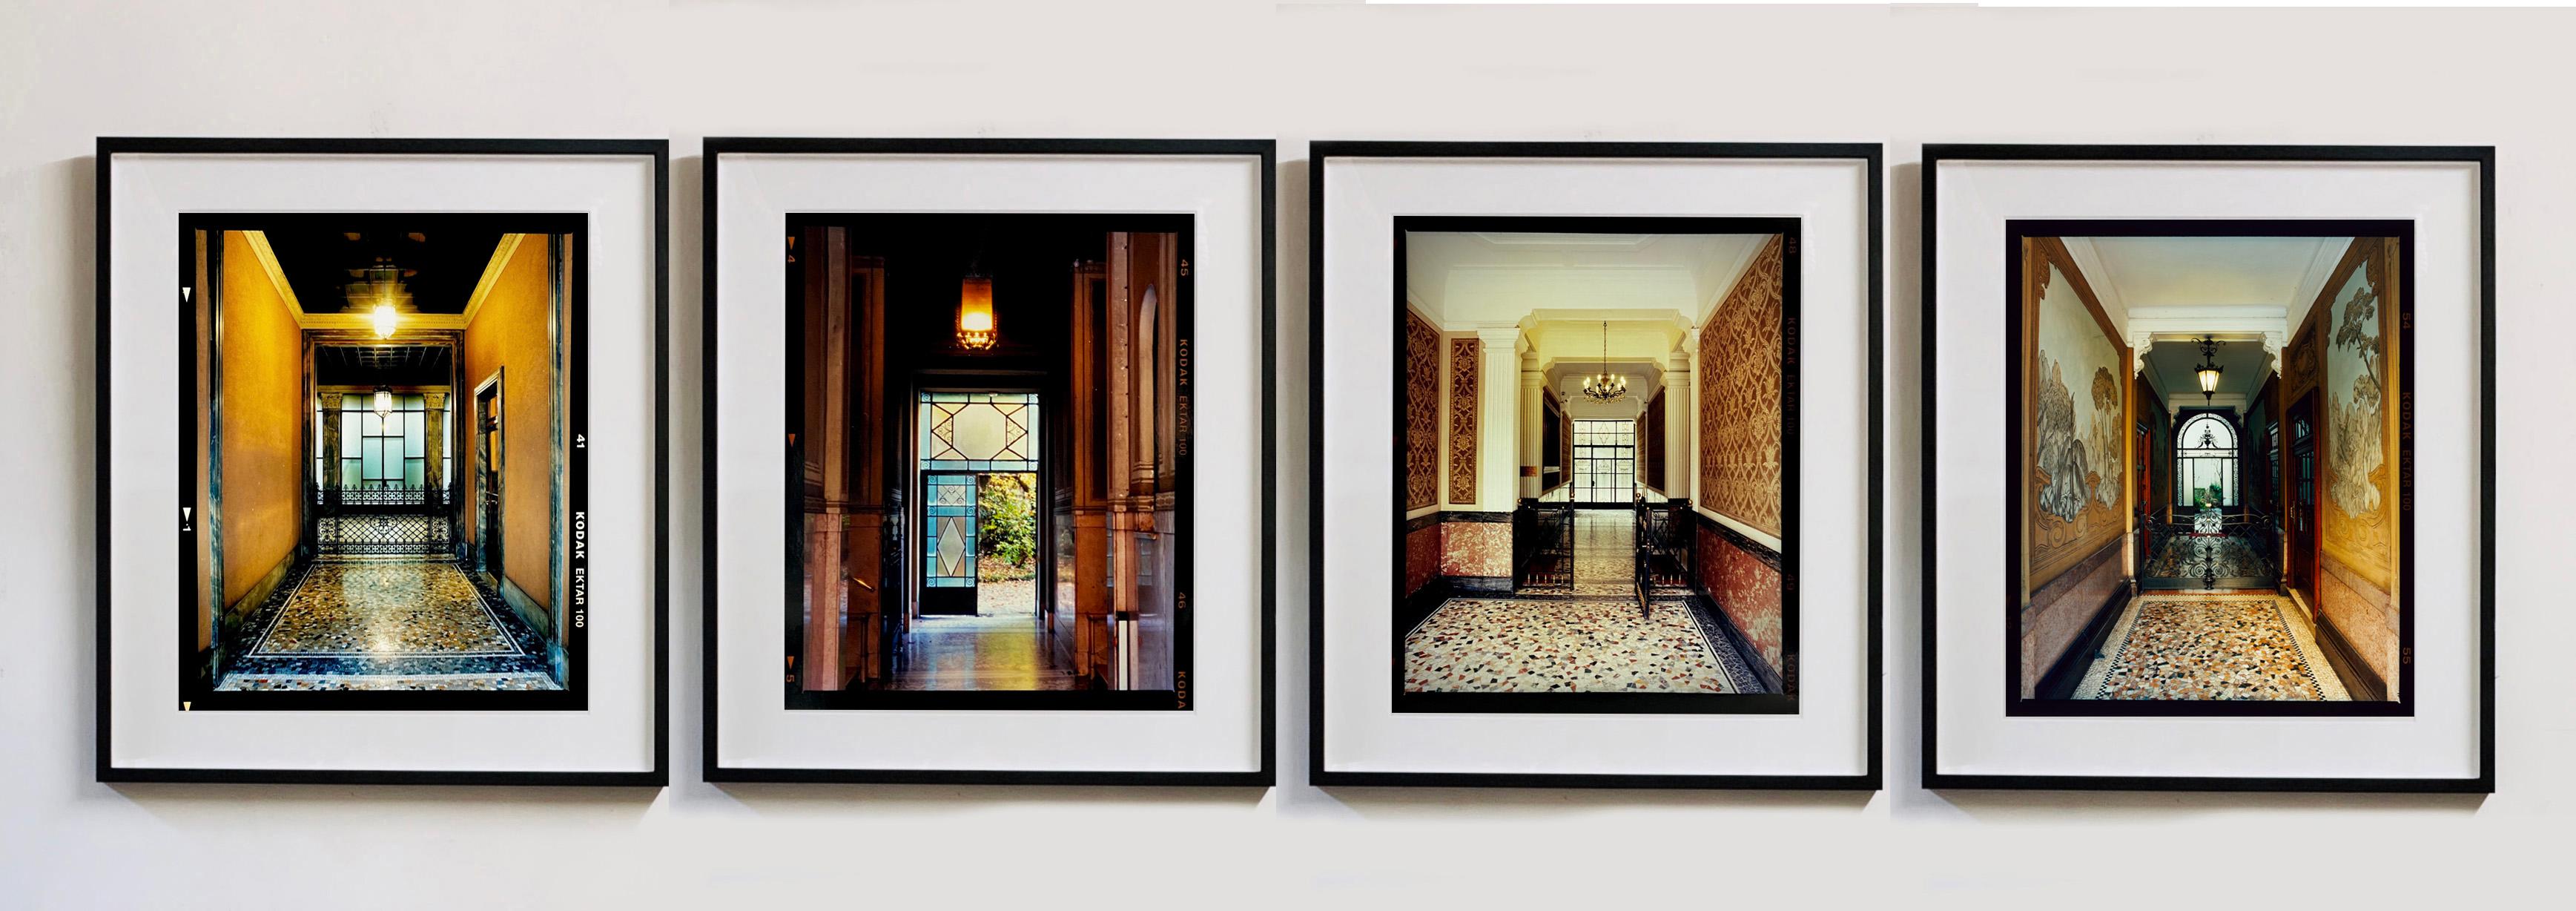 Foyer VI, Milan - Italian architectural color photography For Sale 3